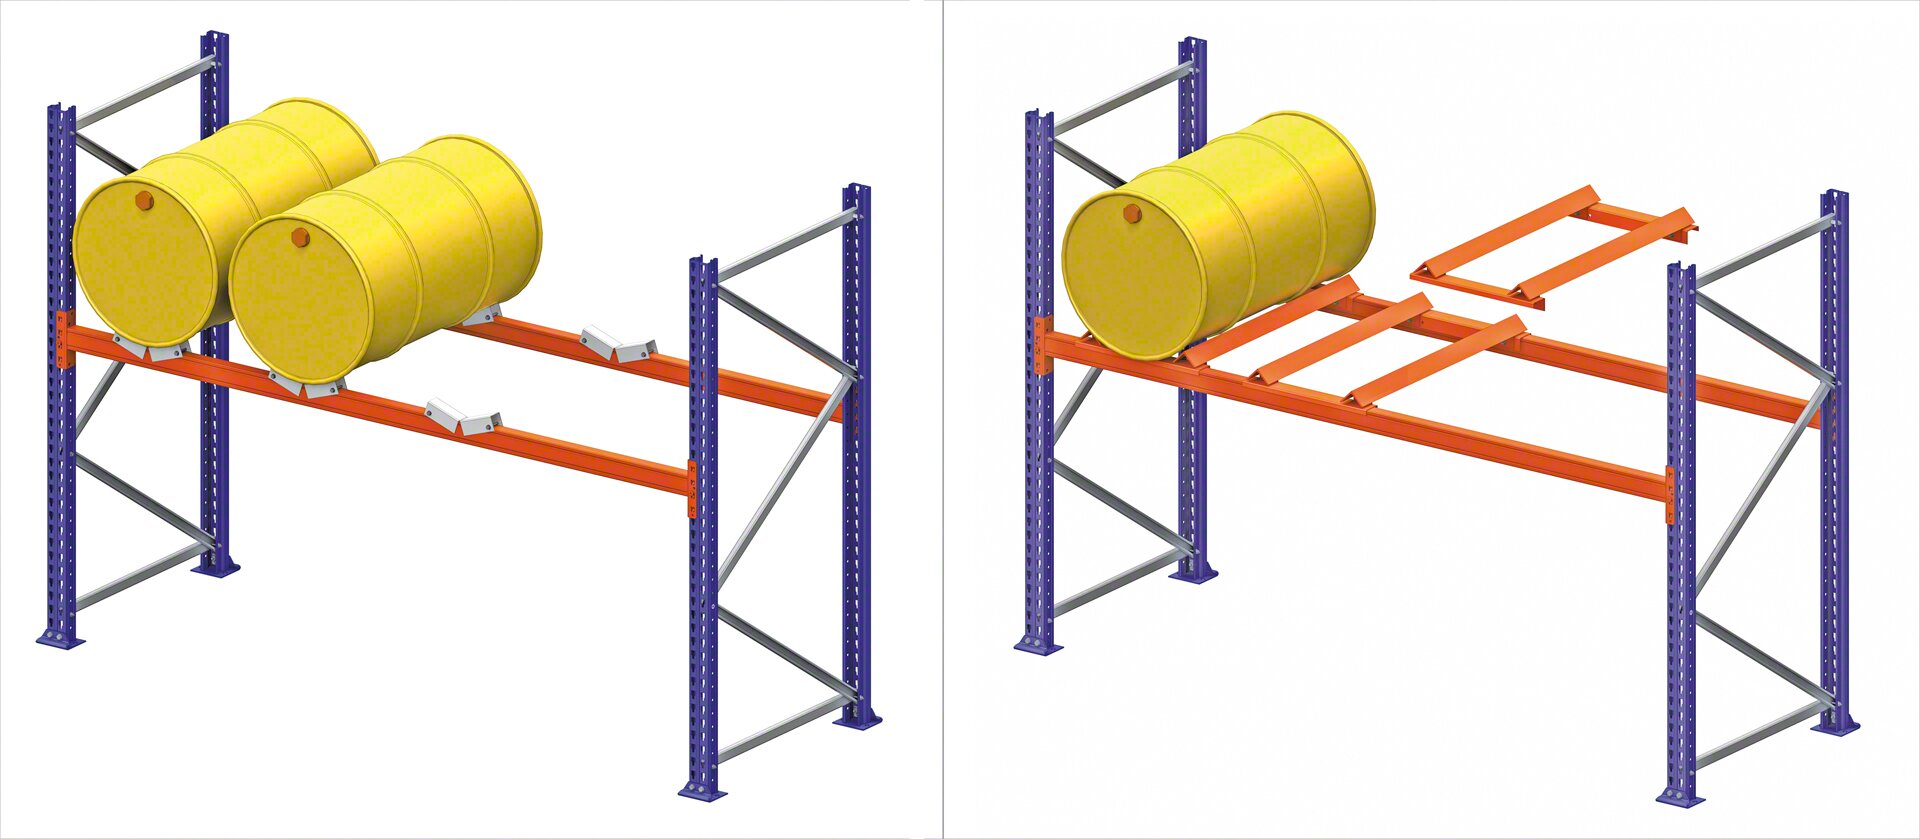 Supports and crossties to store barrels on the racks